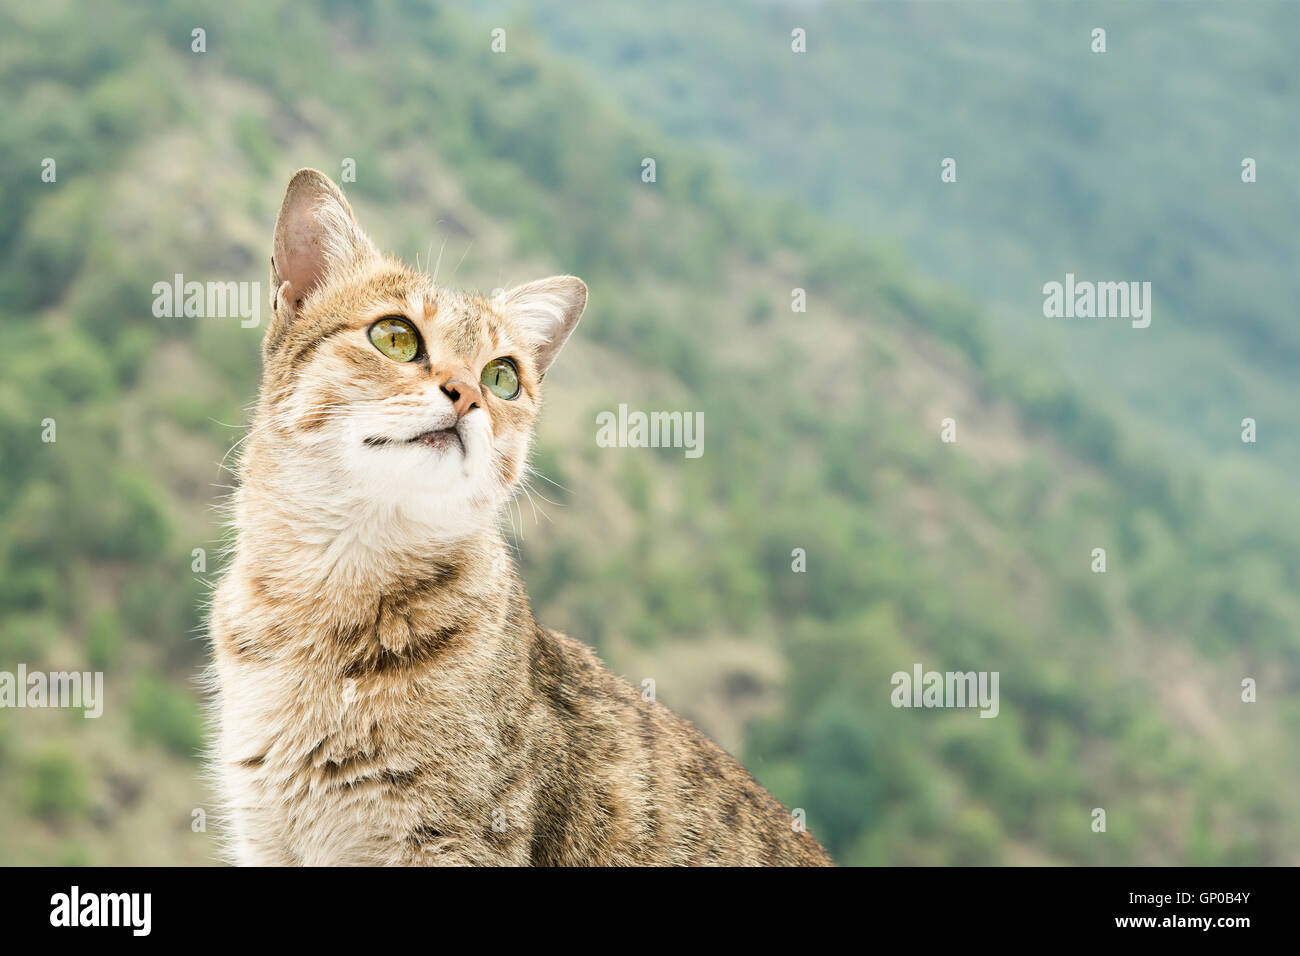 Looking, brown tabby cat on green mountain background. Stock Photo